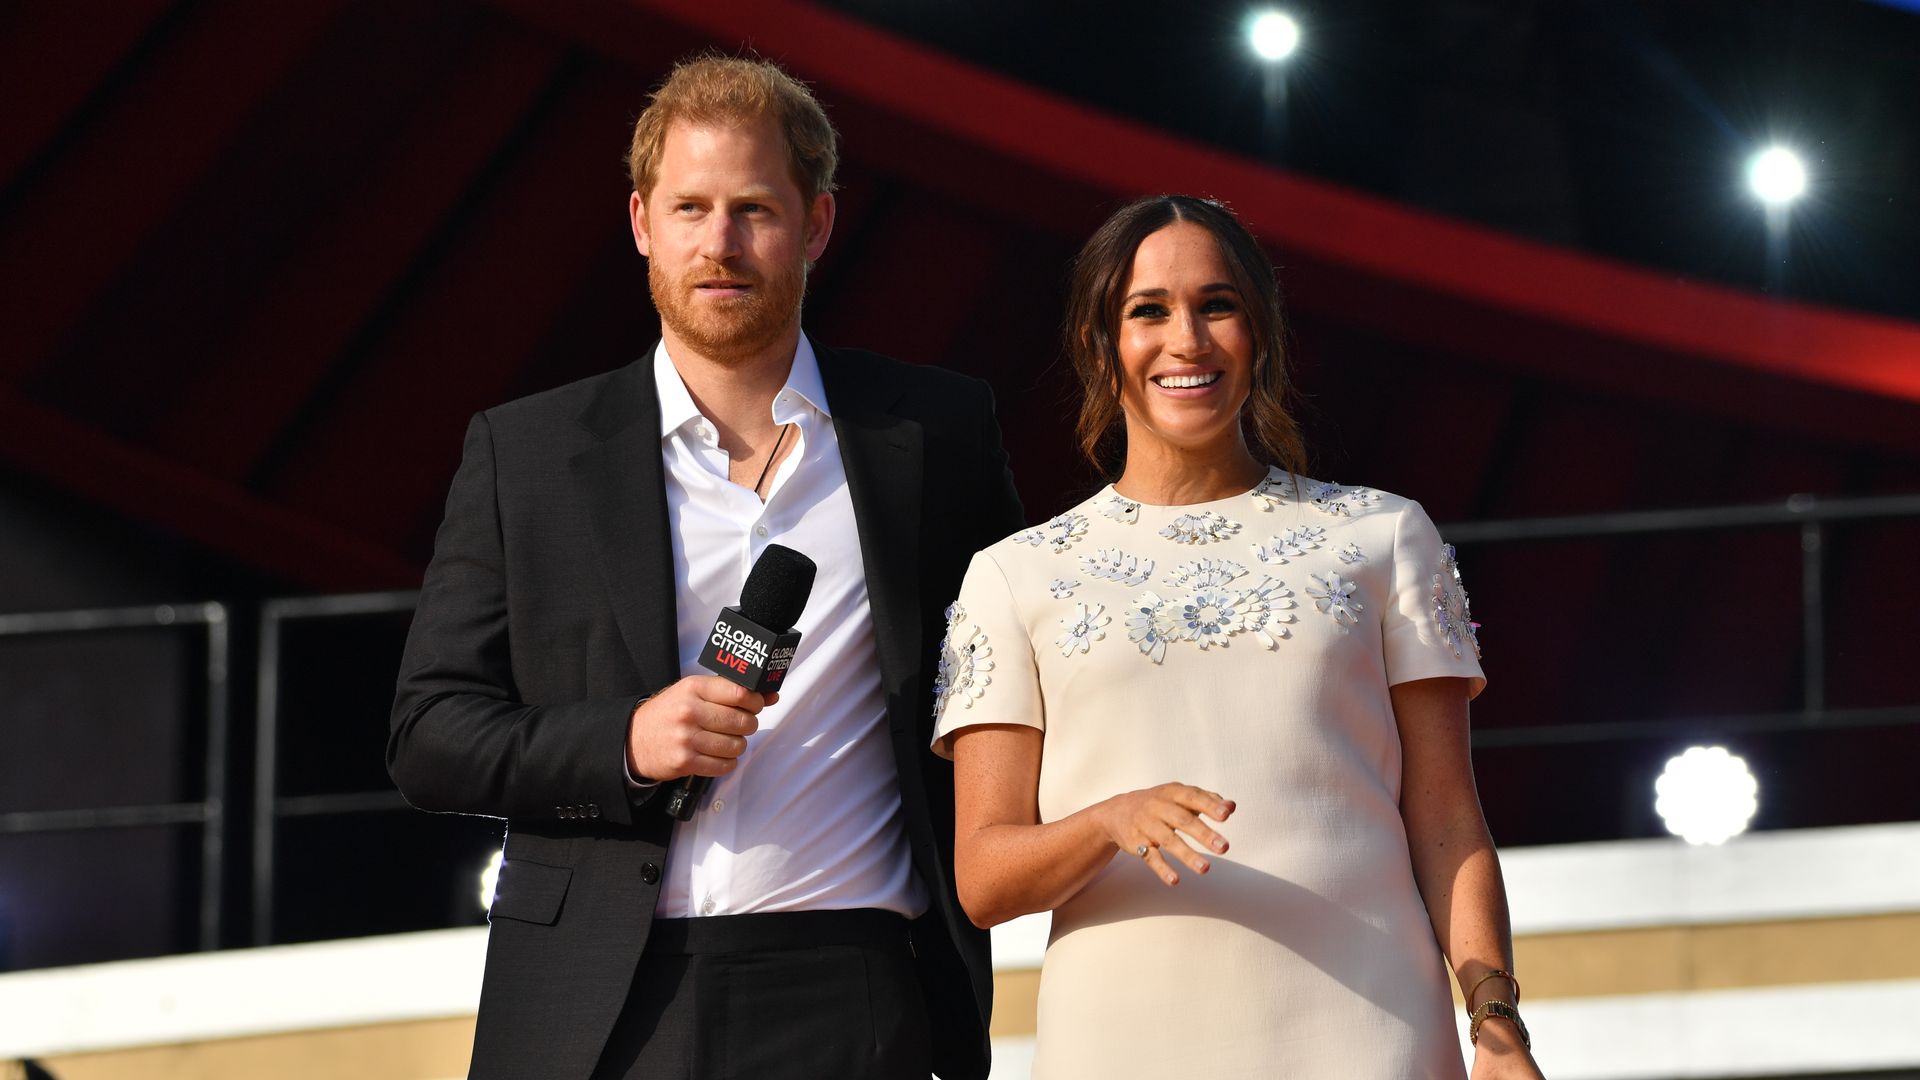 Meghan Markle and Prince Harry holding microphones